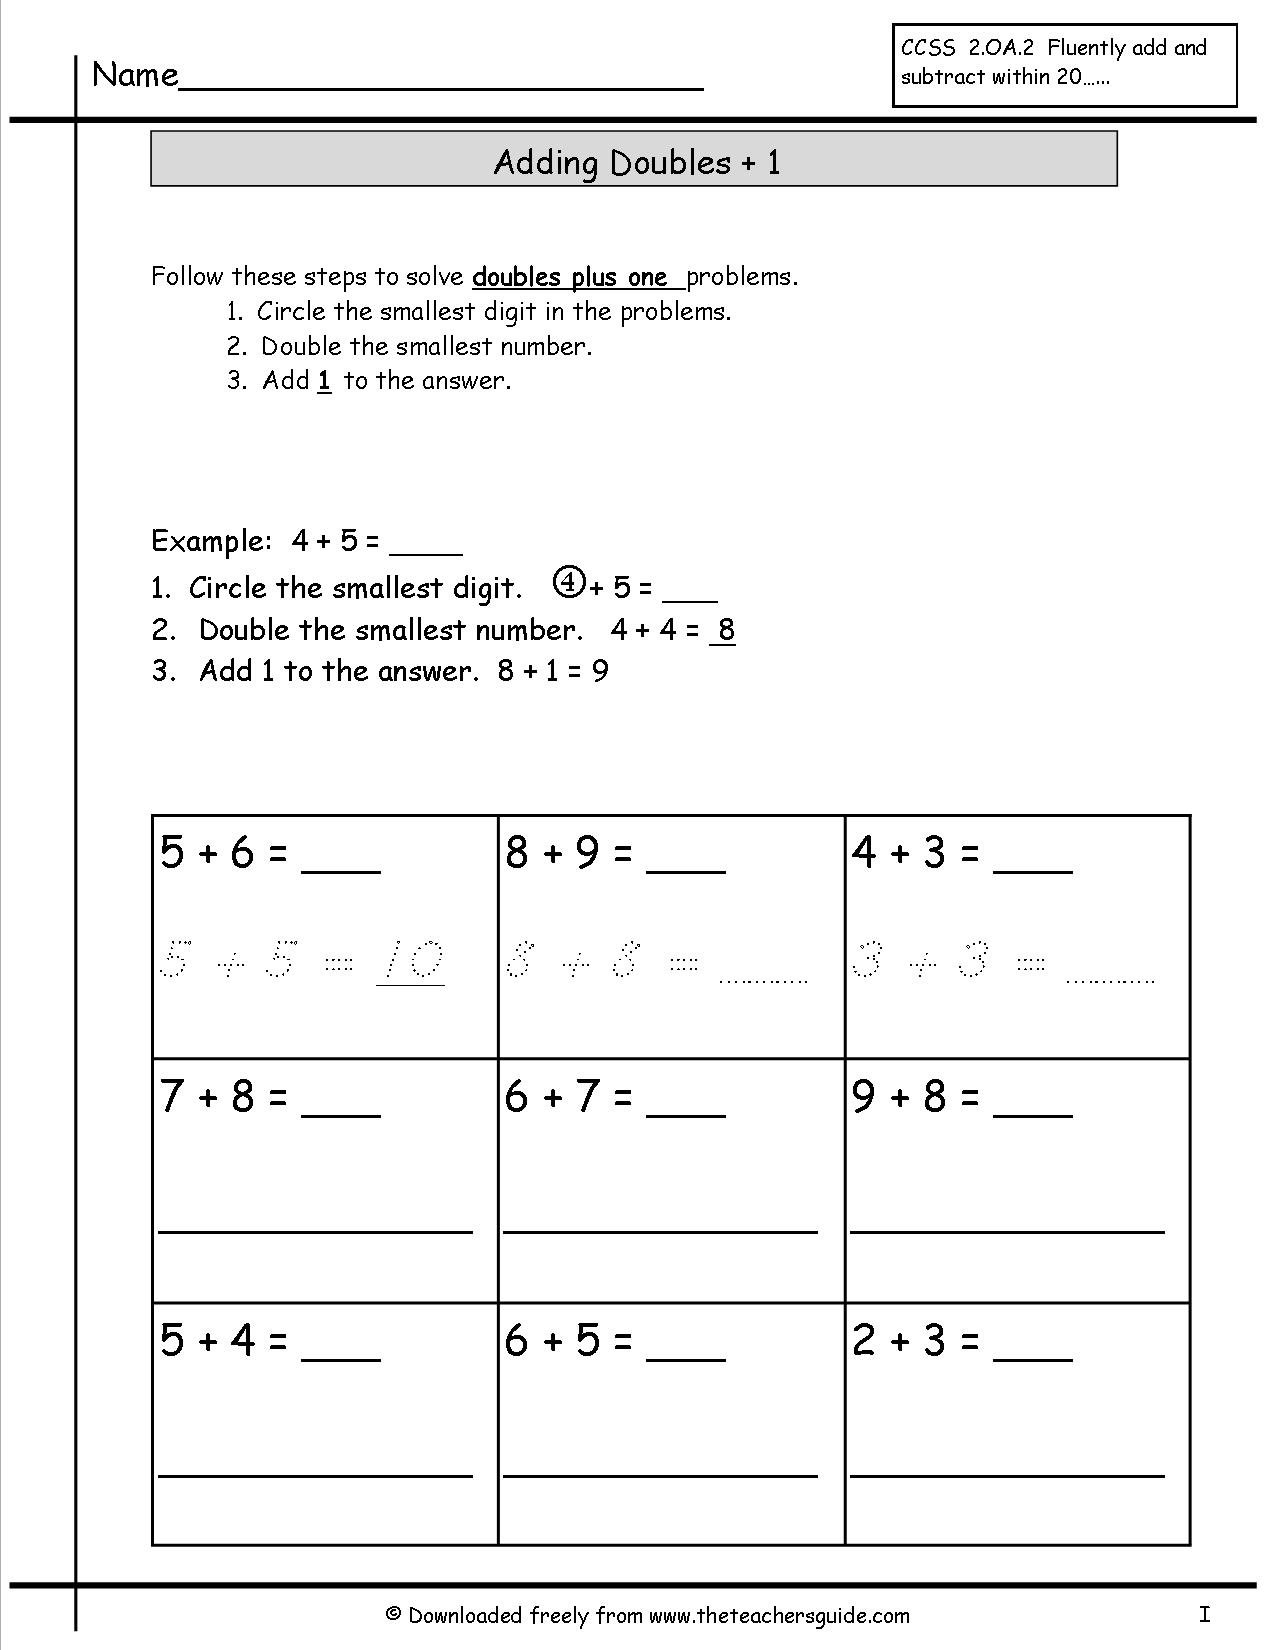 Single Digit Addition Worksheets From The Teachers Guide Doubles